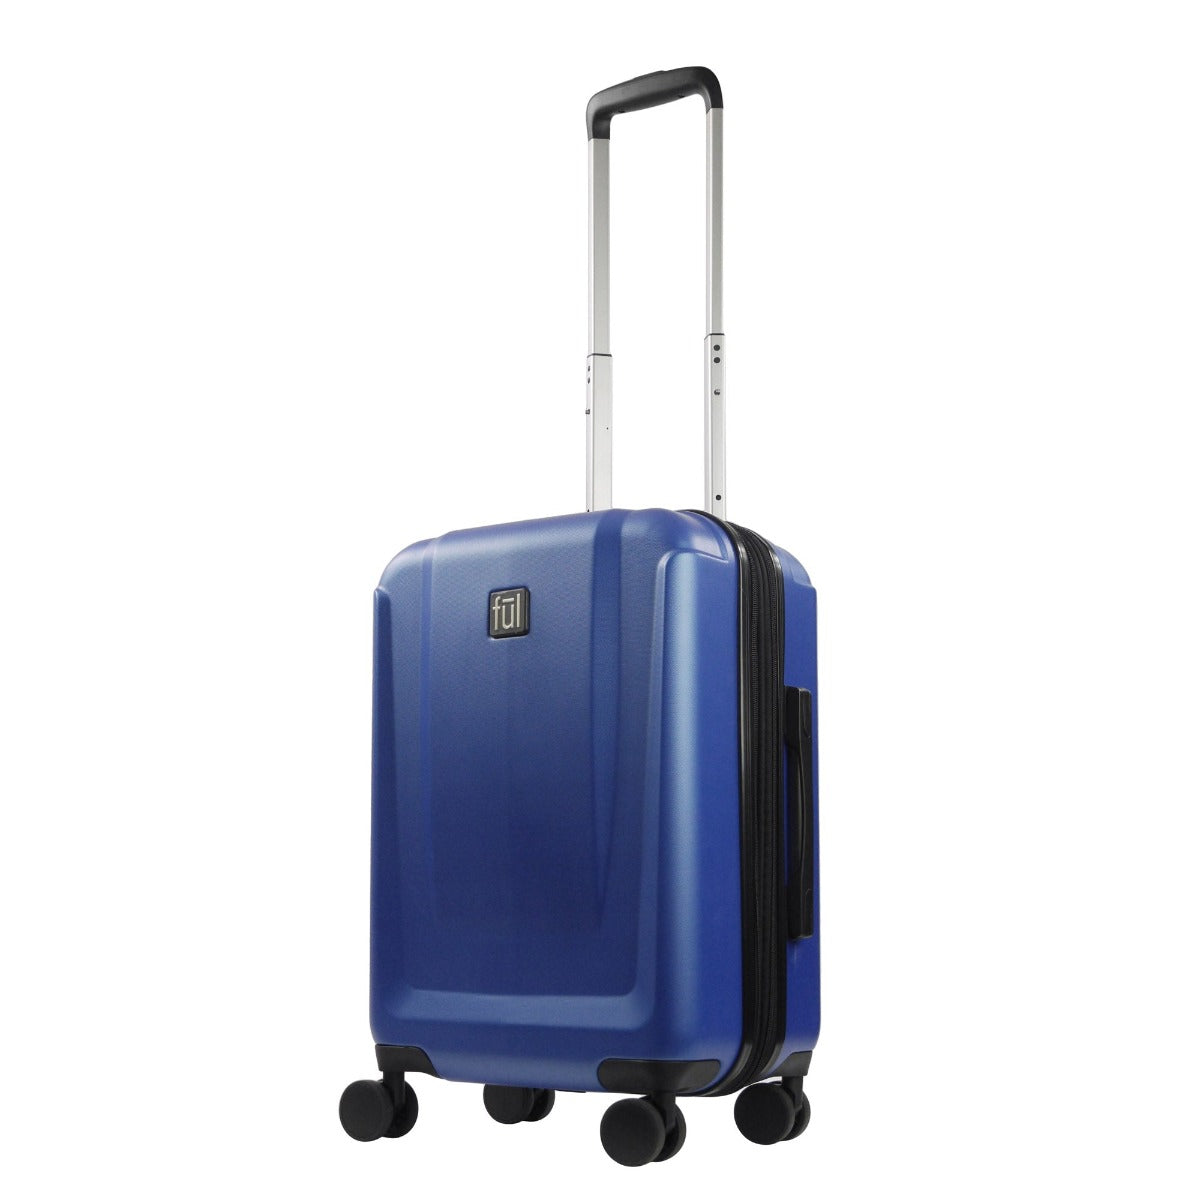 Load Rider 21" Spinner Suitcase Rolling carry on hard sided Luggage Cobalt Blue